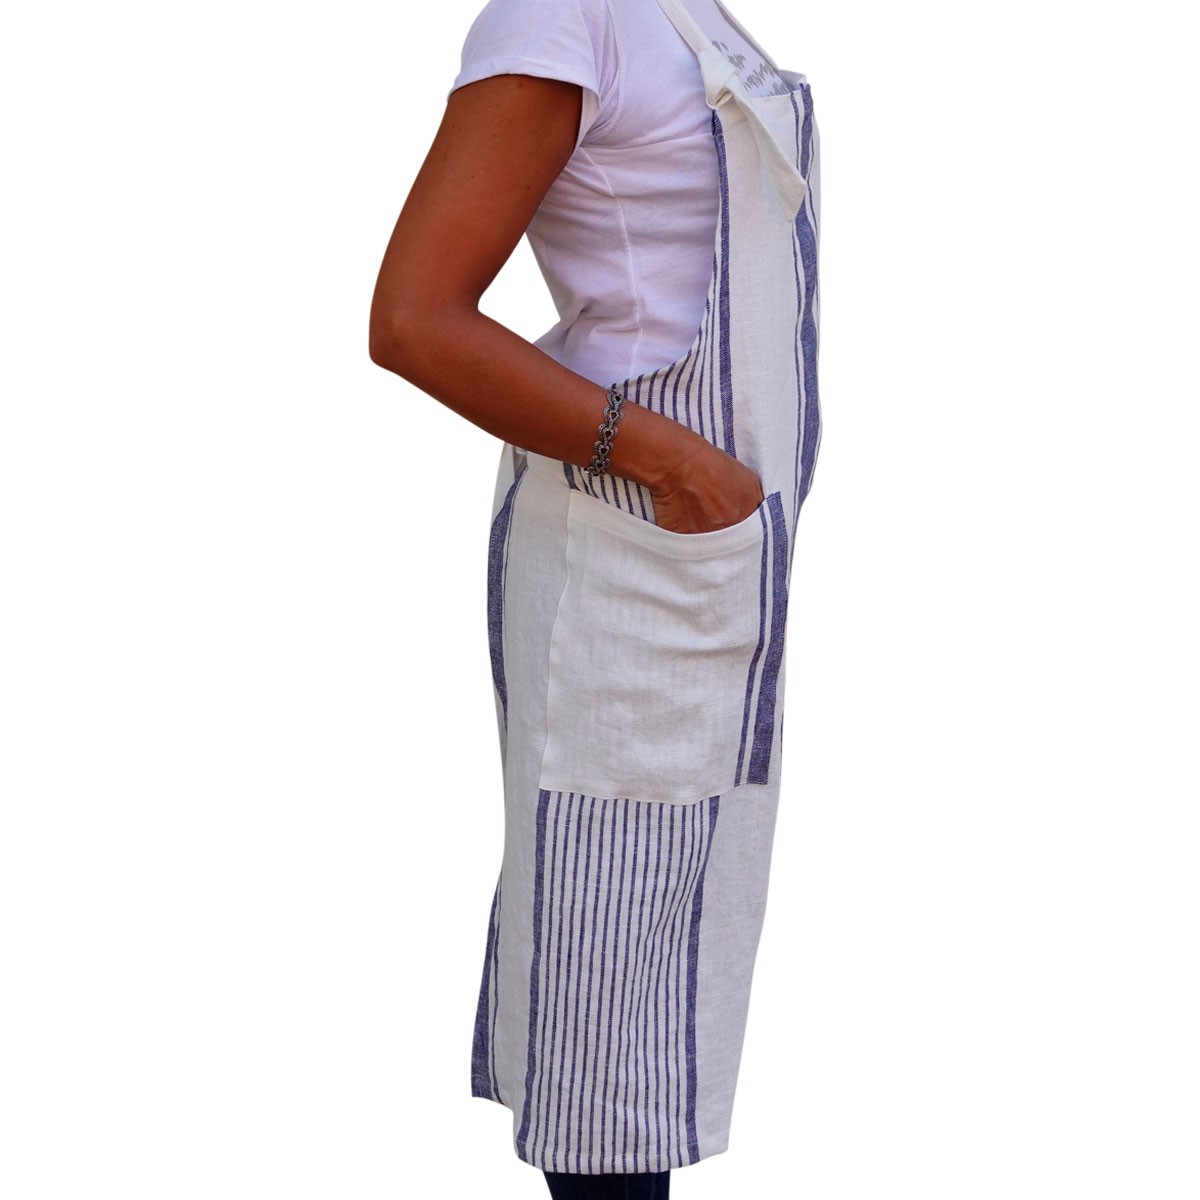 Apron with stripes - Washed linen